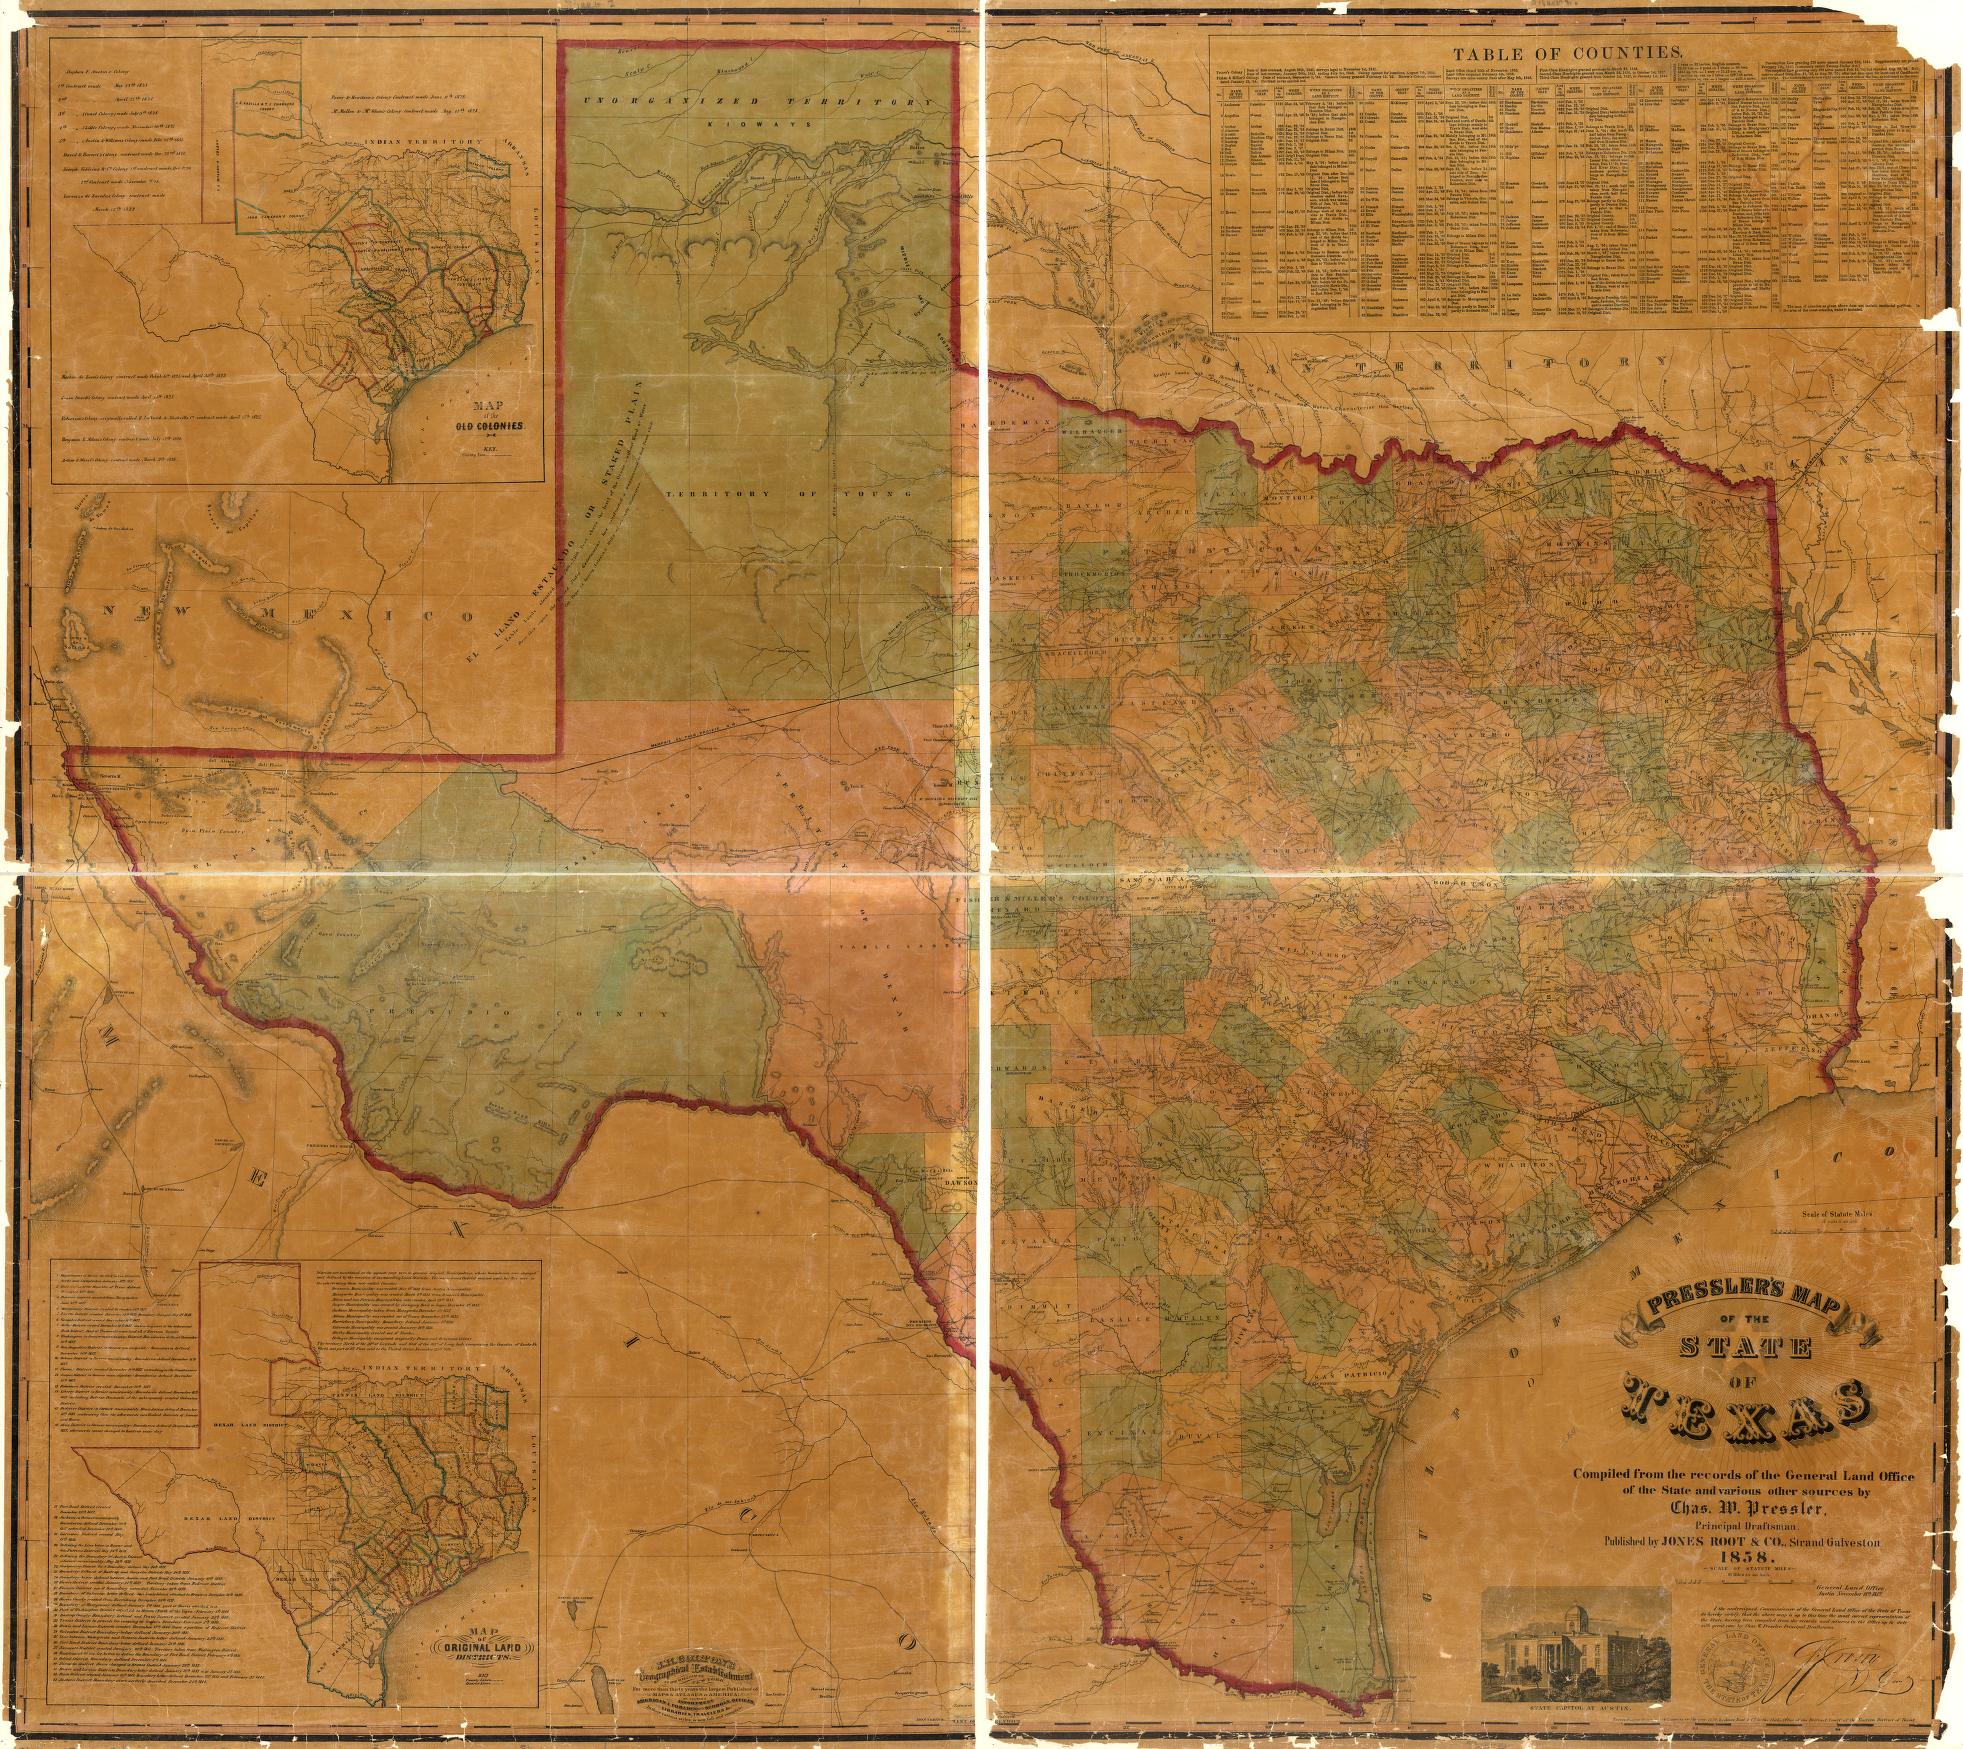 1858 Pressler's map of the state of Texas